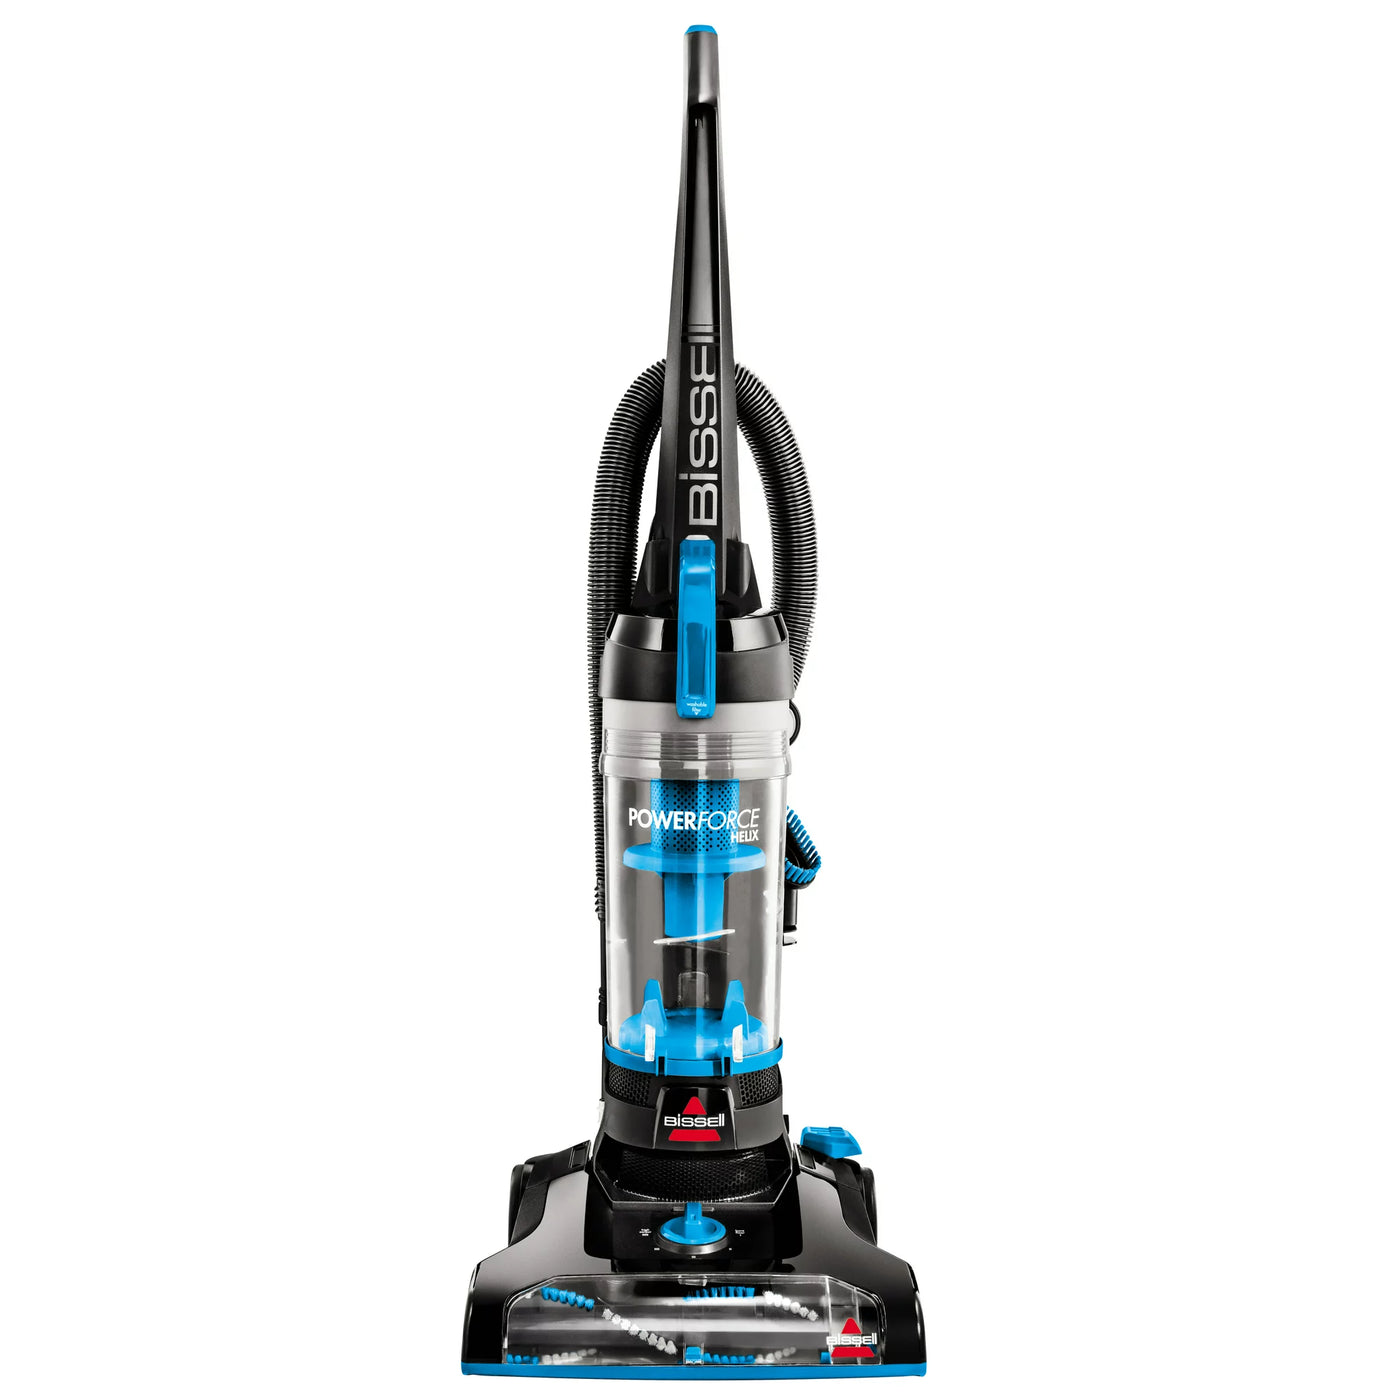 BISSELL Power Force Helix Bagless Upright Vacuum 2191 - $45